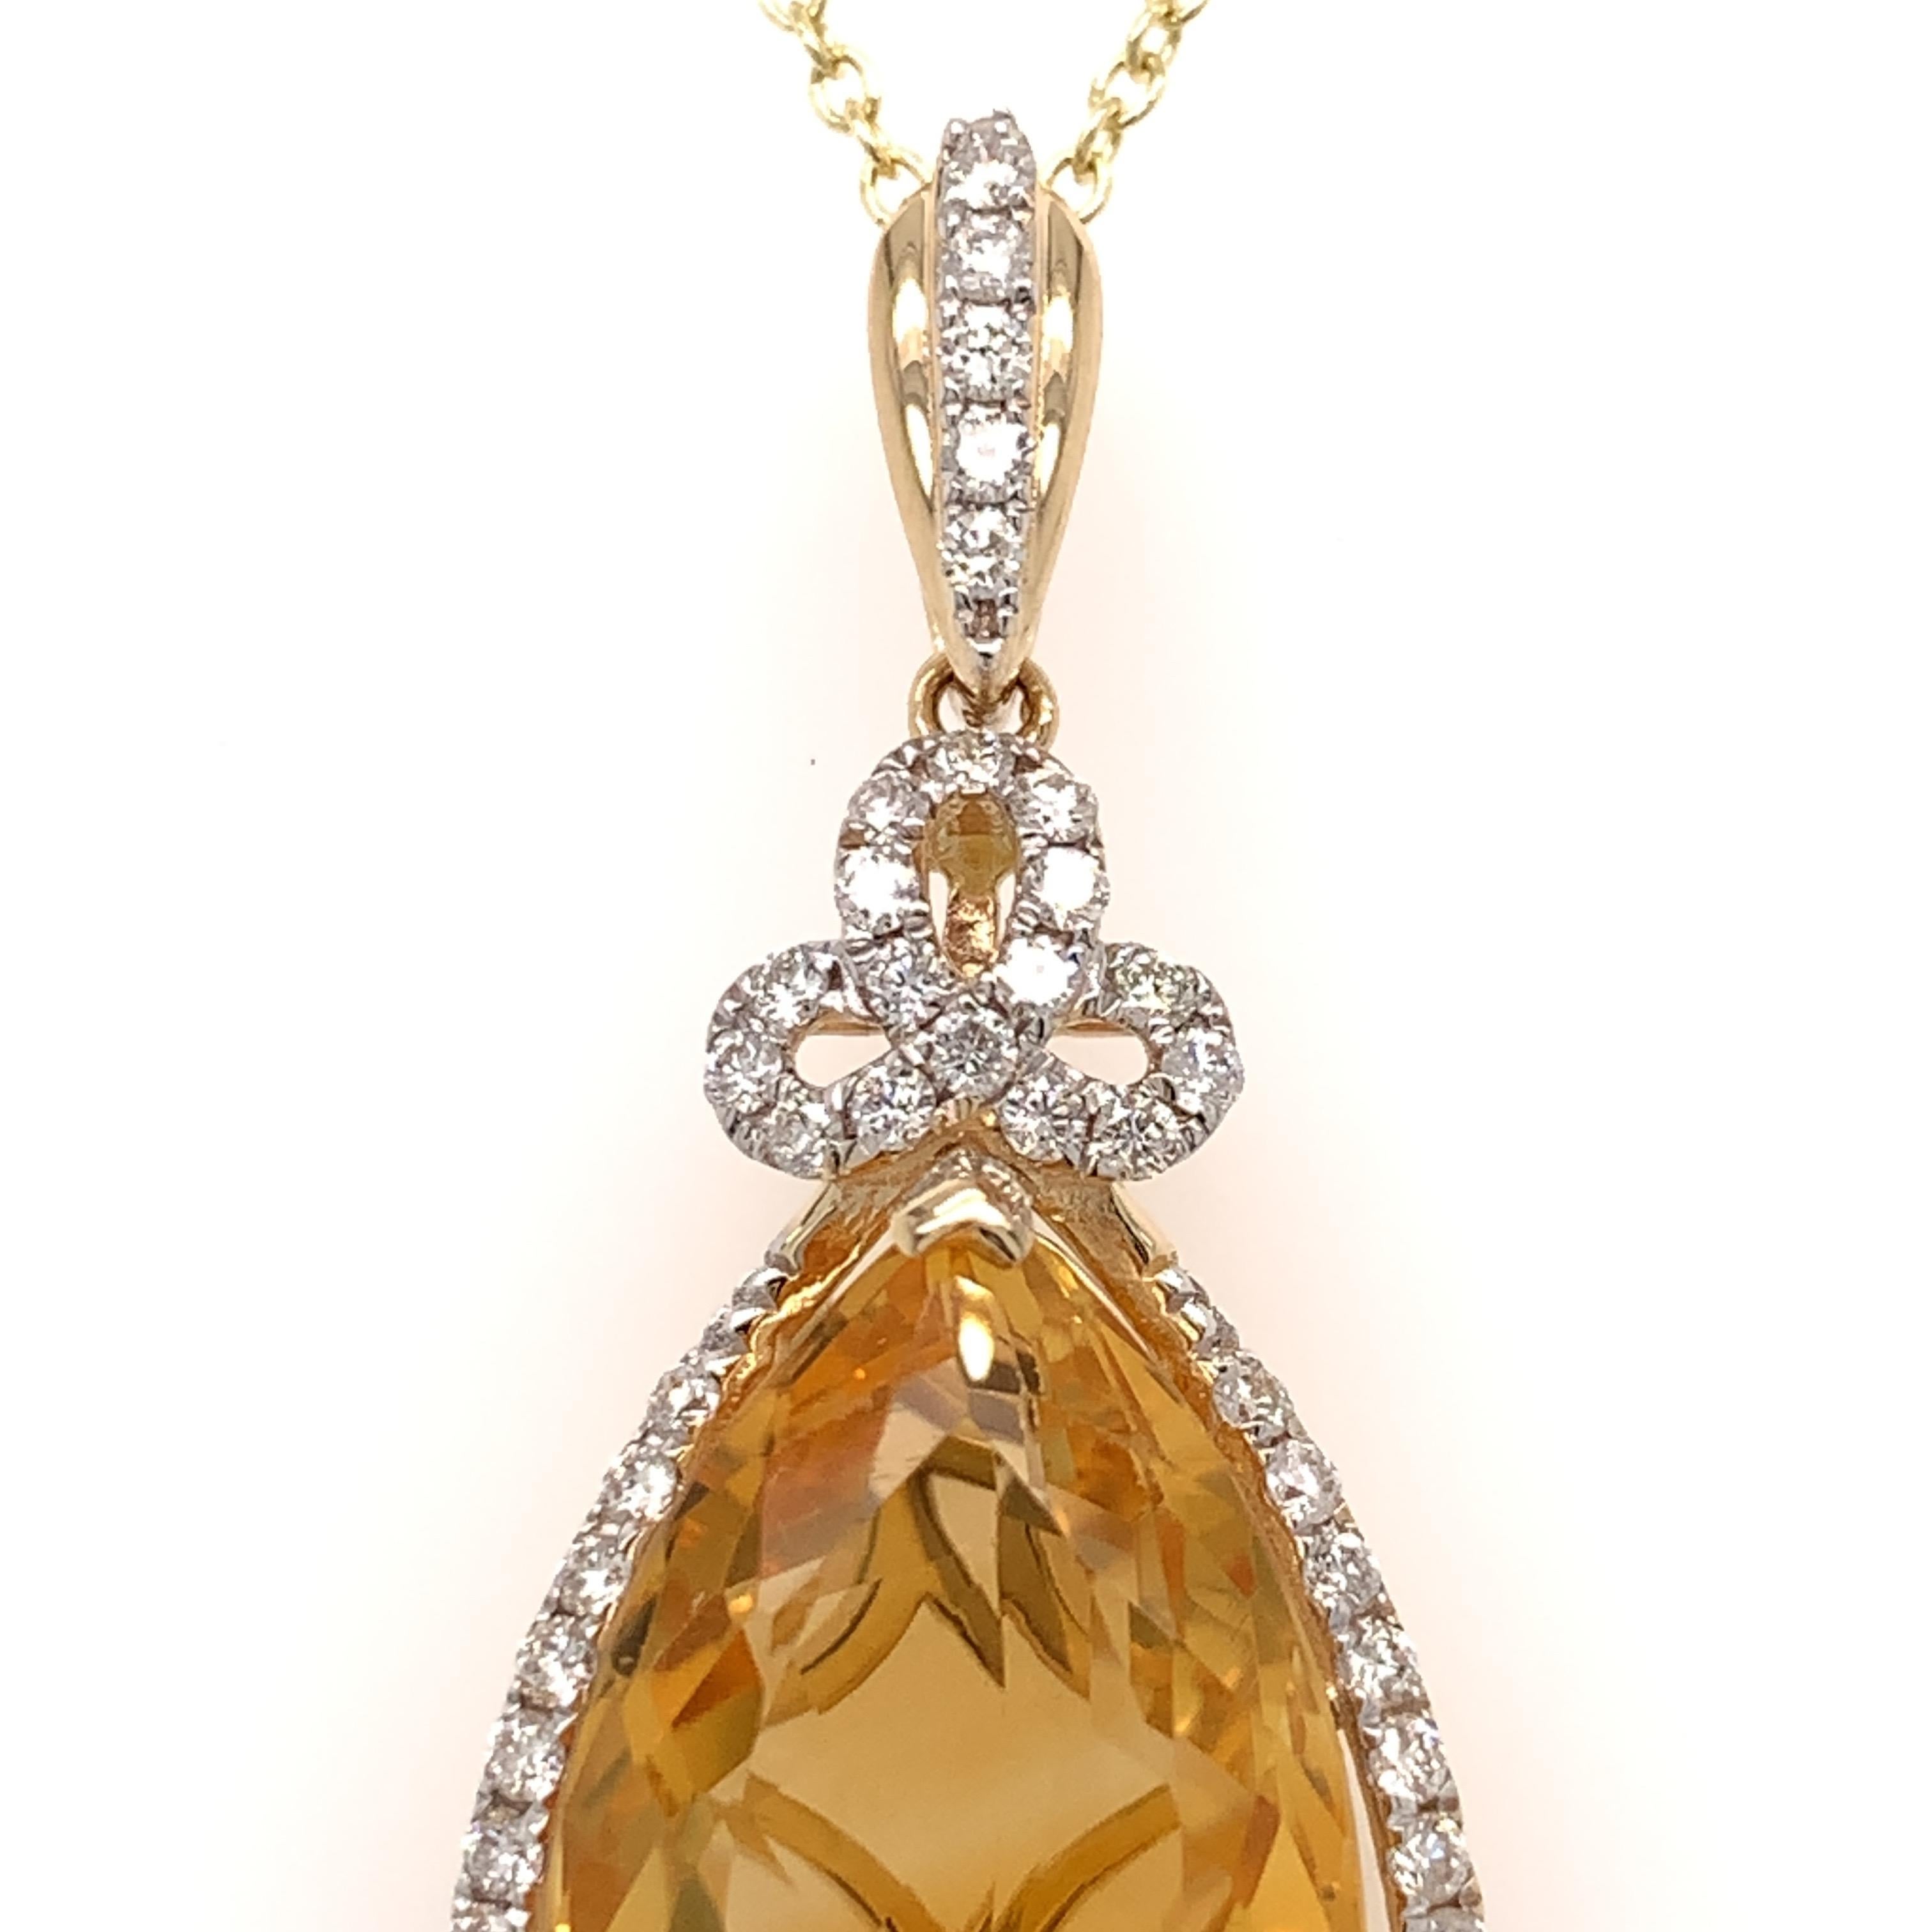 Elegant citrine diamond pendant. High brilliance, golden honey yellow, trillion faceted, natural 6.55 carats citrine encased in basket mount with three prongs,  accented with round. brilliant cut diamonds. Handcrafted fine design set in 14 karats